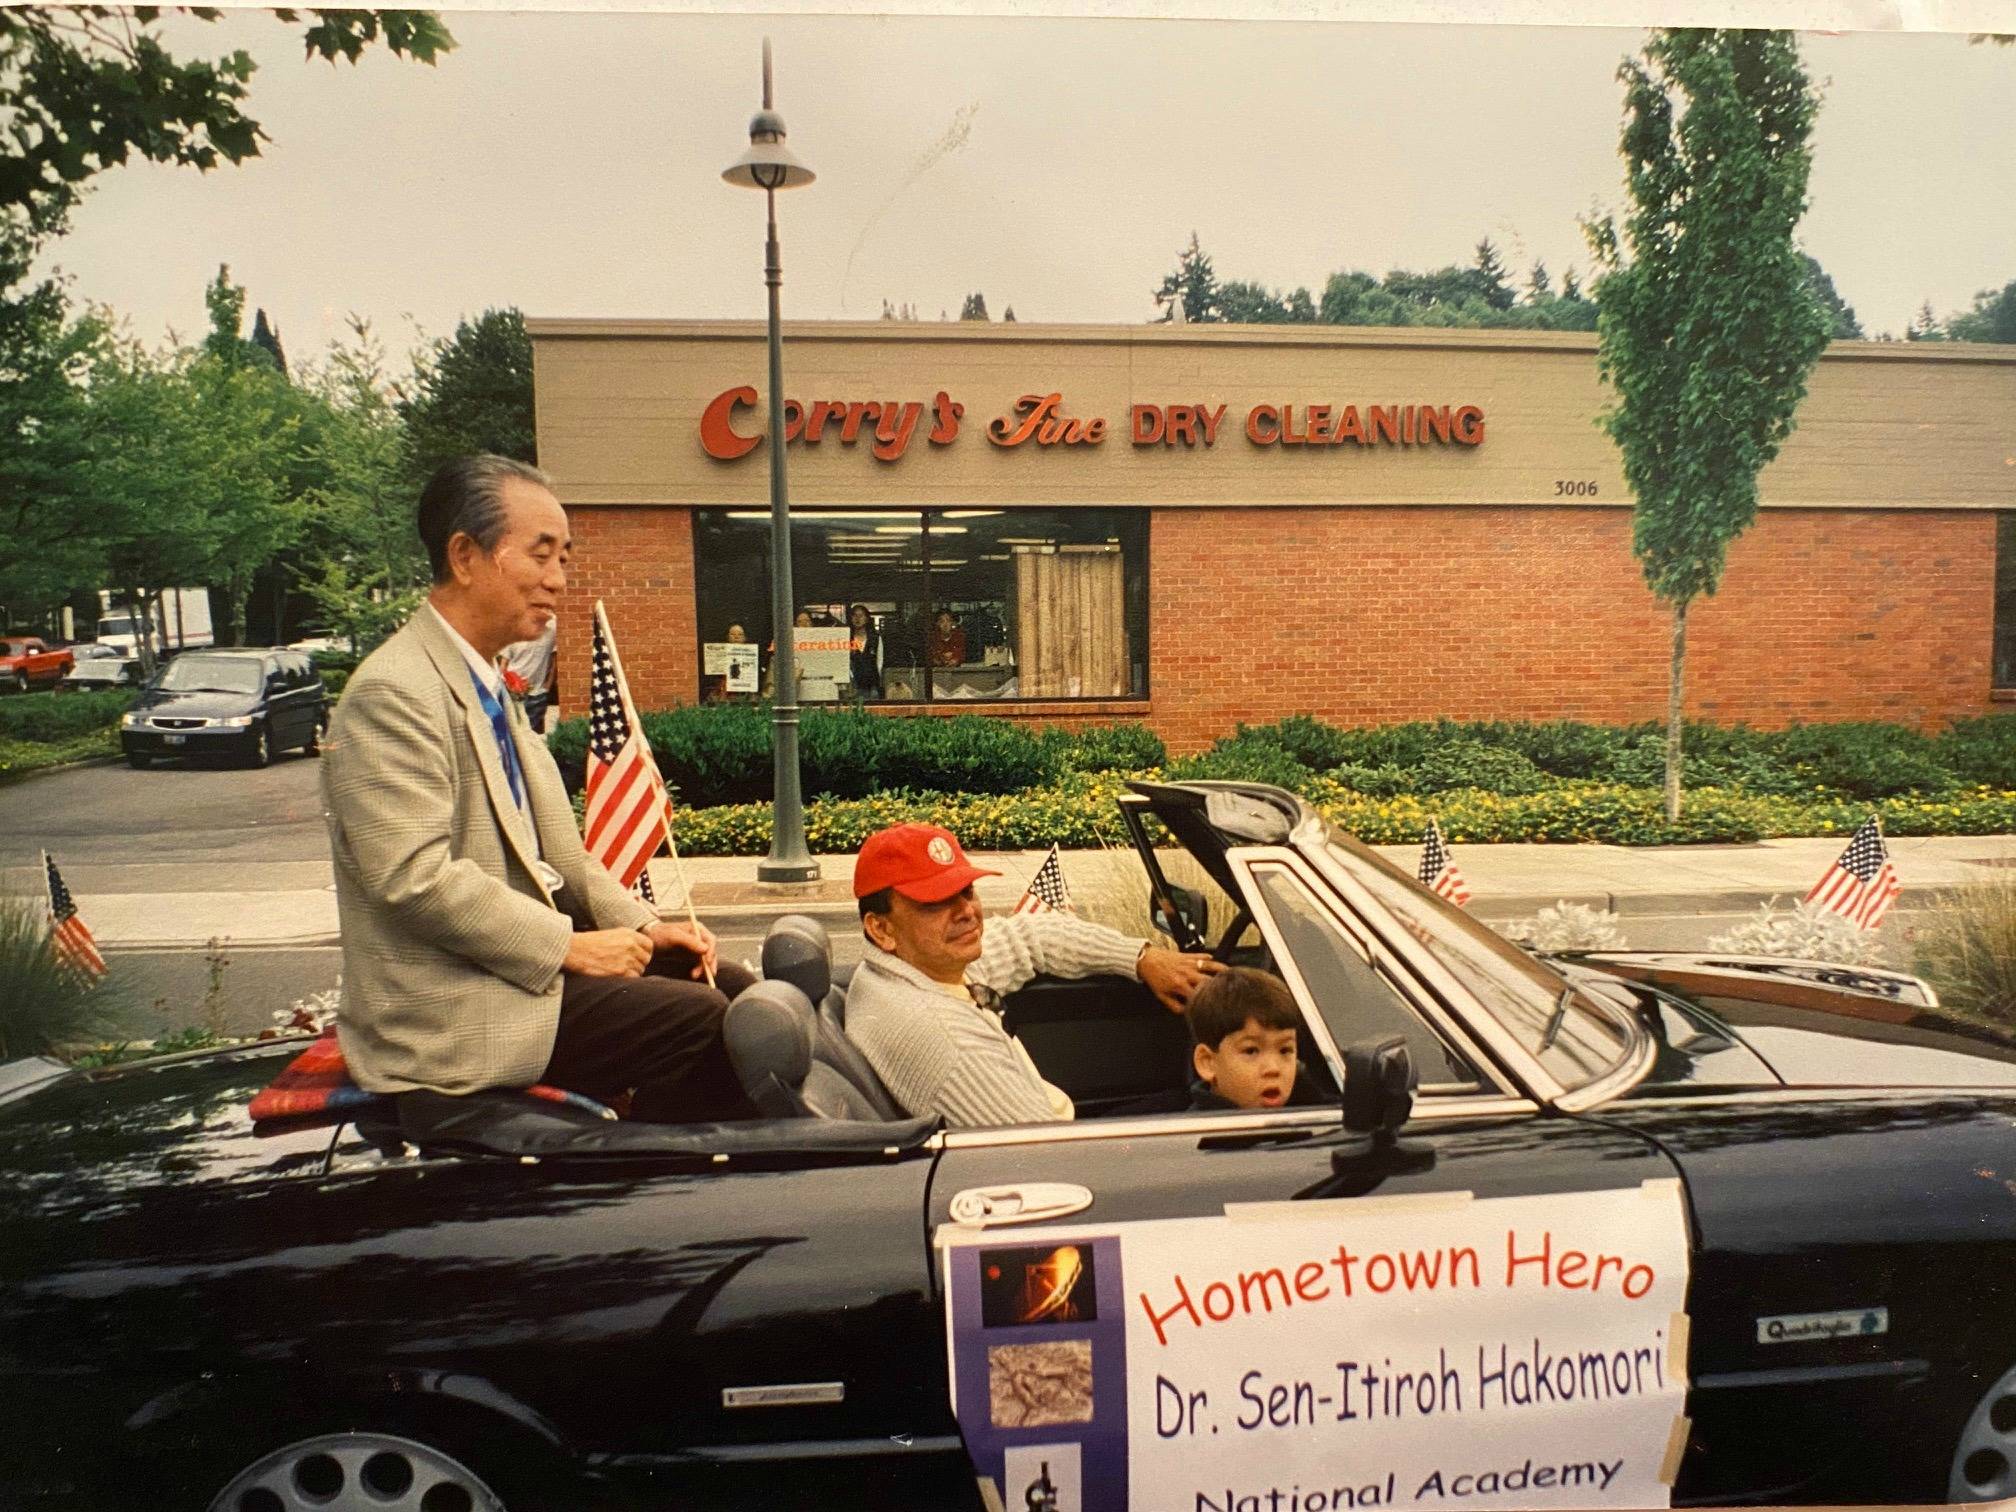 Dr. Sen-itiroh Hakomori was honored as a hometown hero at the Mercer Island Summer Celebration Parade in 2000. Courtesy photo